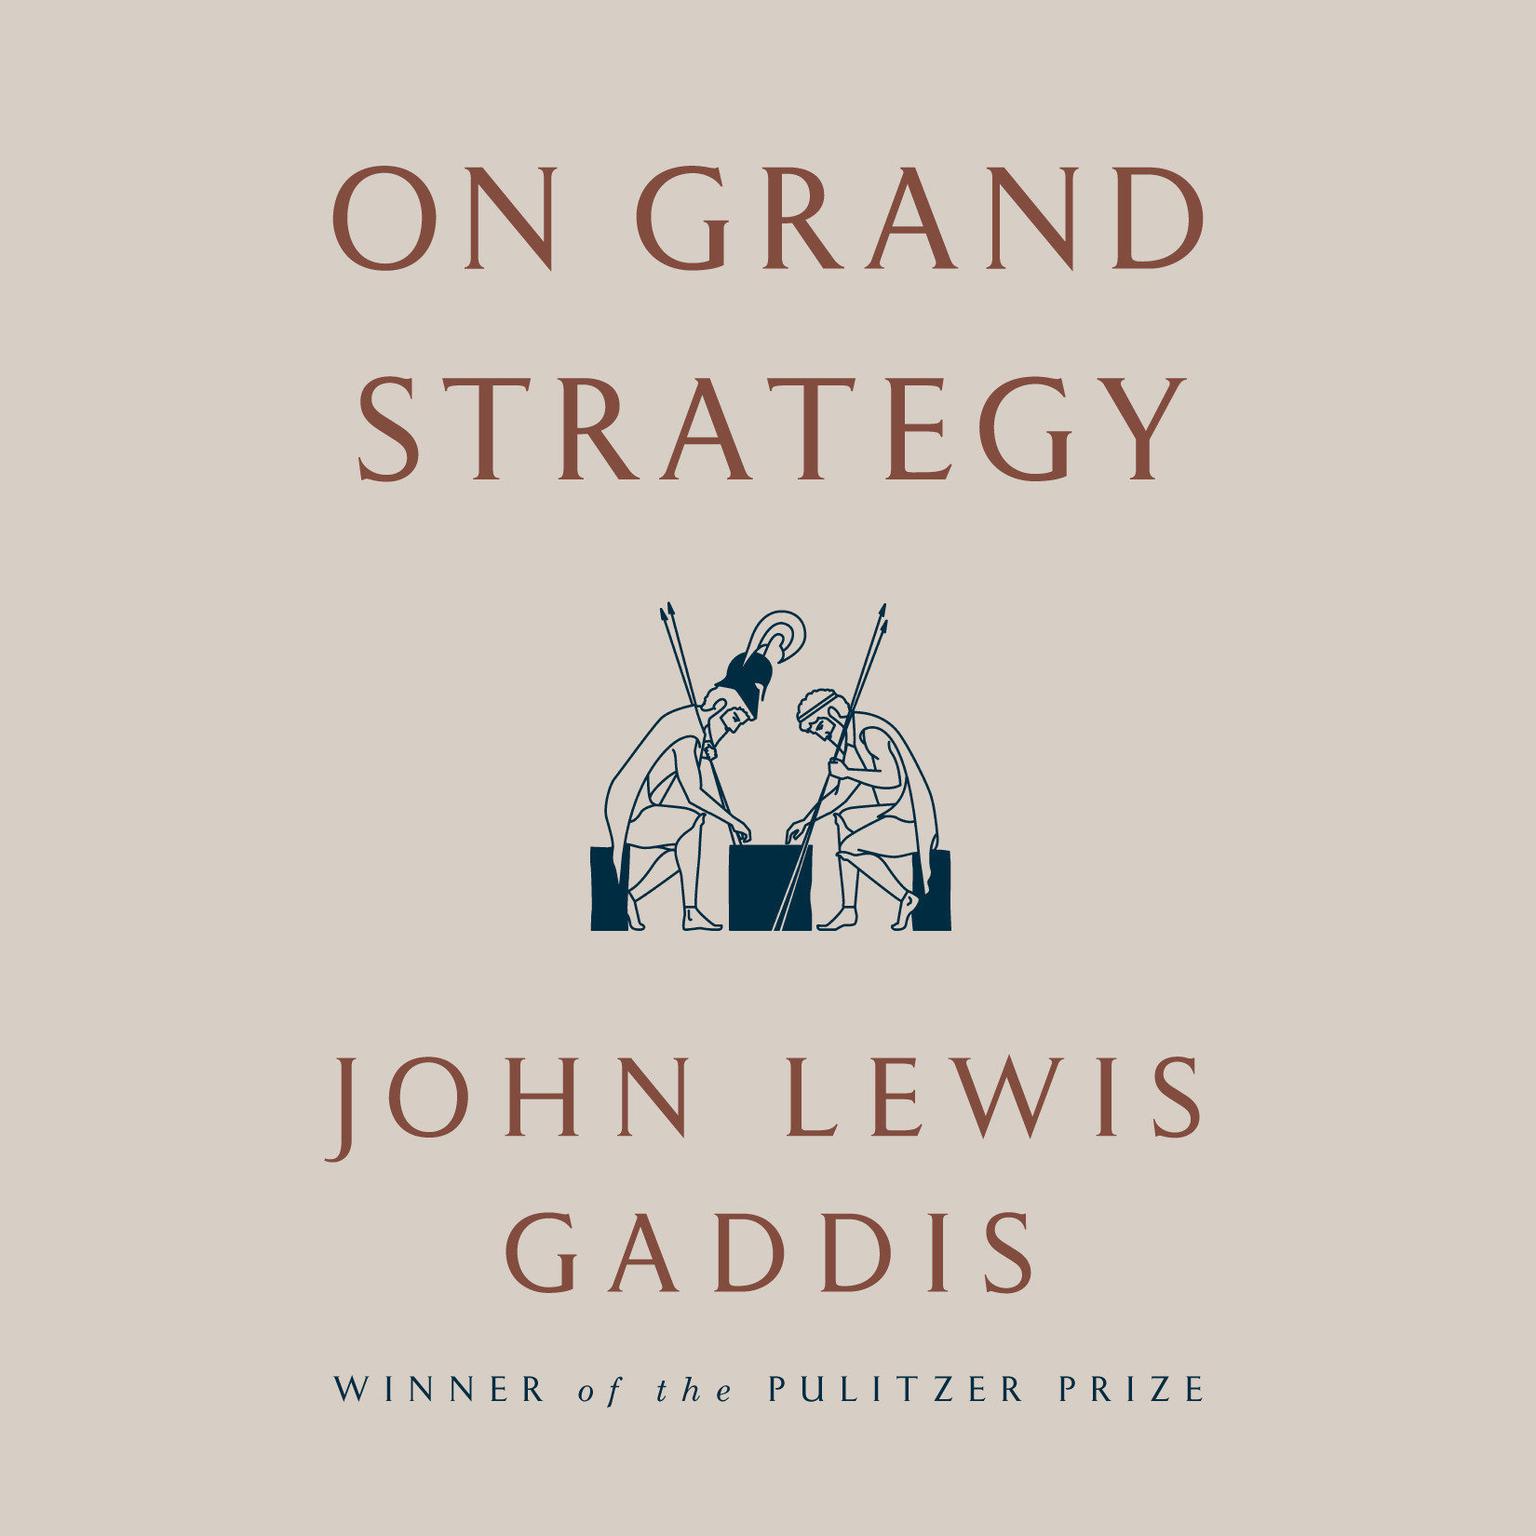 On Grand Strategy Audiobook, by John Lewis Gaddis